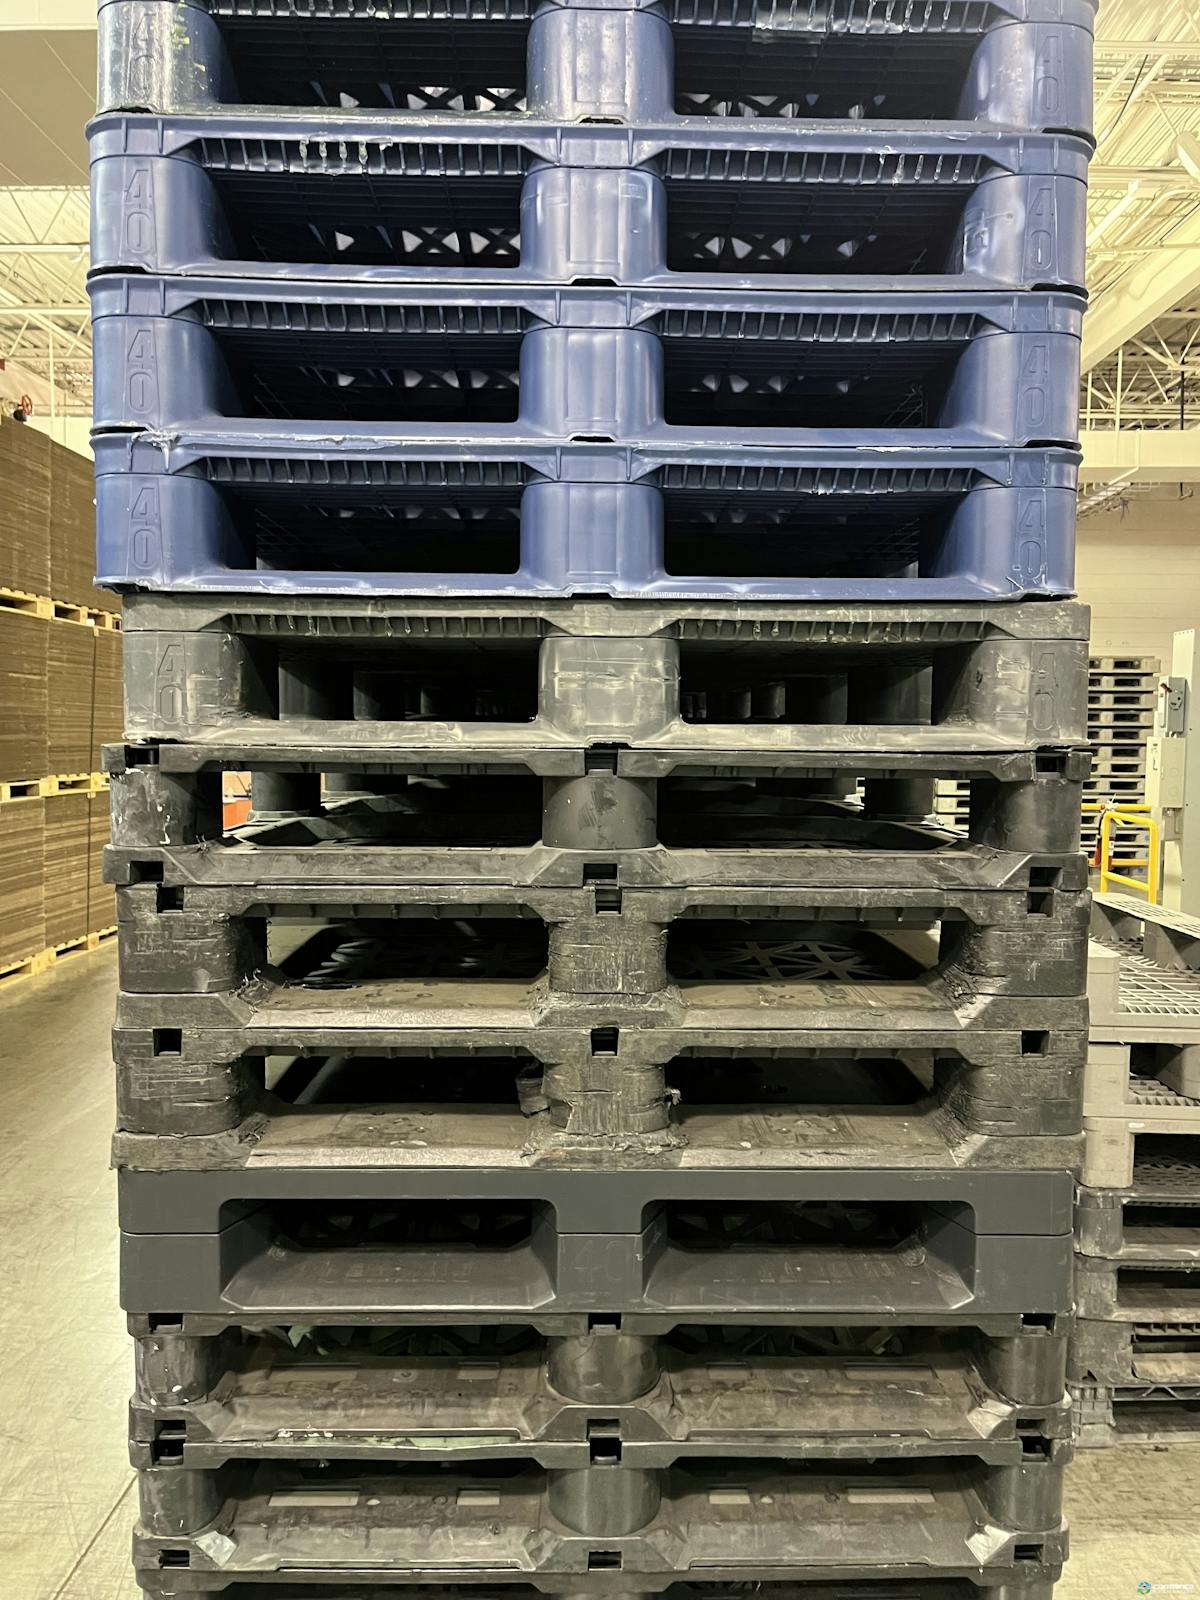 Plastic Pallets For Sale: Used 48x40 Heavy Duty Plastic Pallets Mixed colors Massachusetts In Massachusetts - image 3